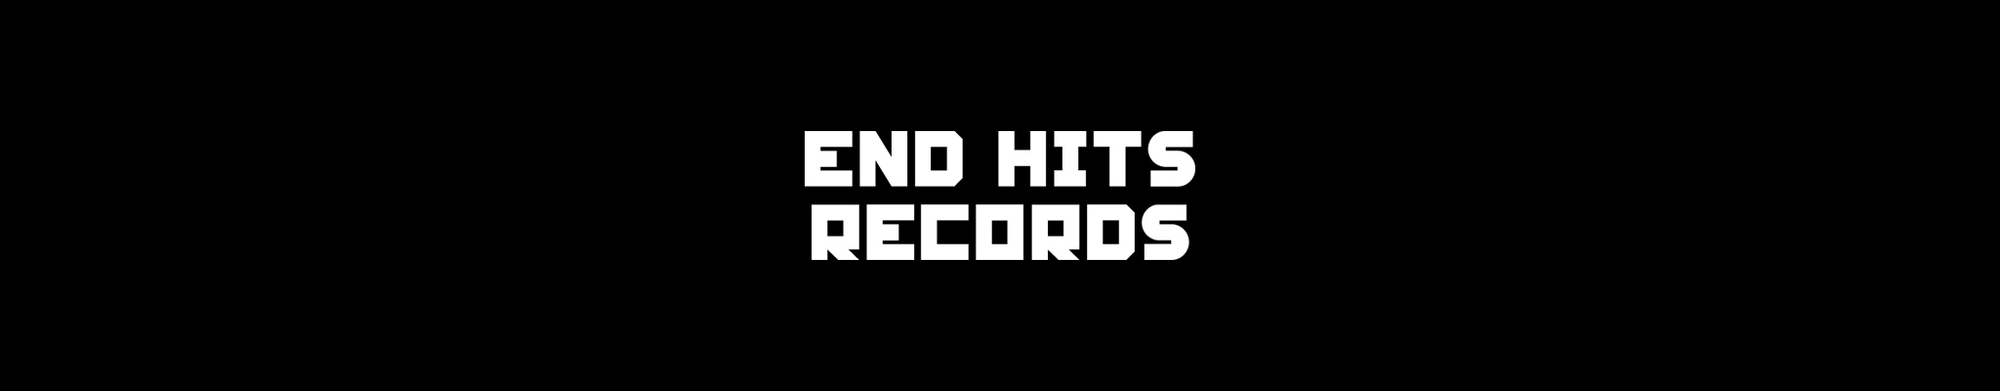 END HITS